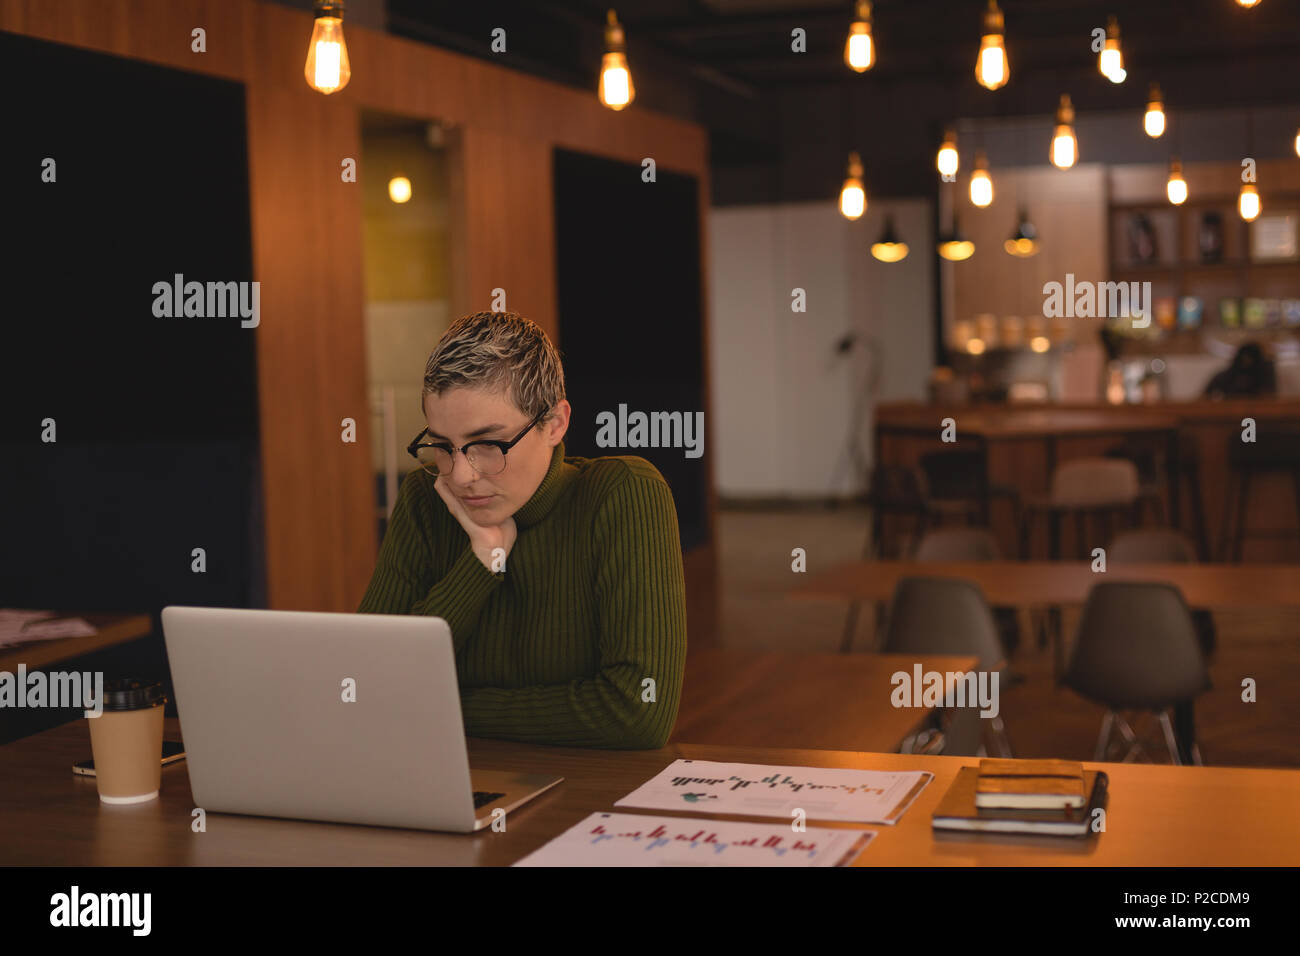 Businesswoman using laptop in cafeteria Stock Photo